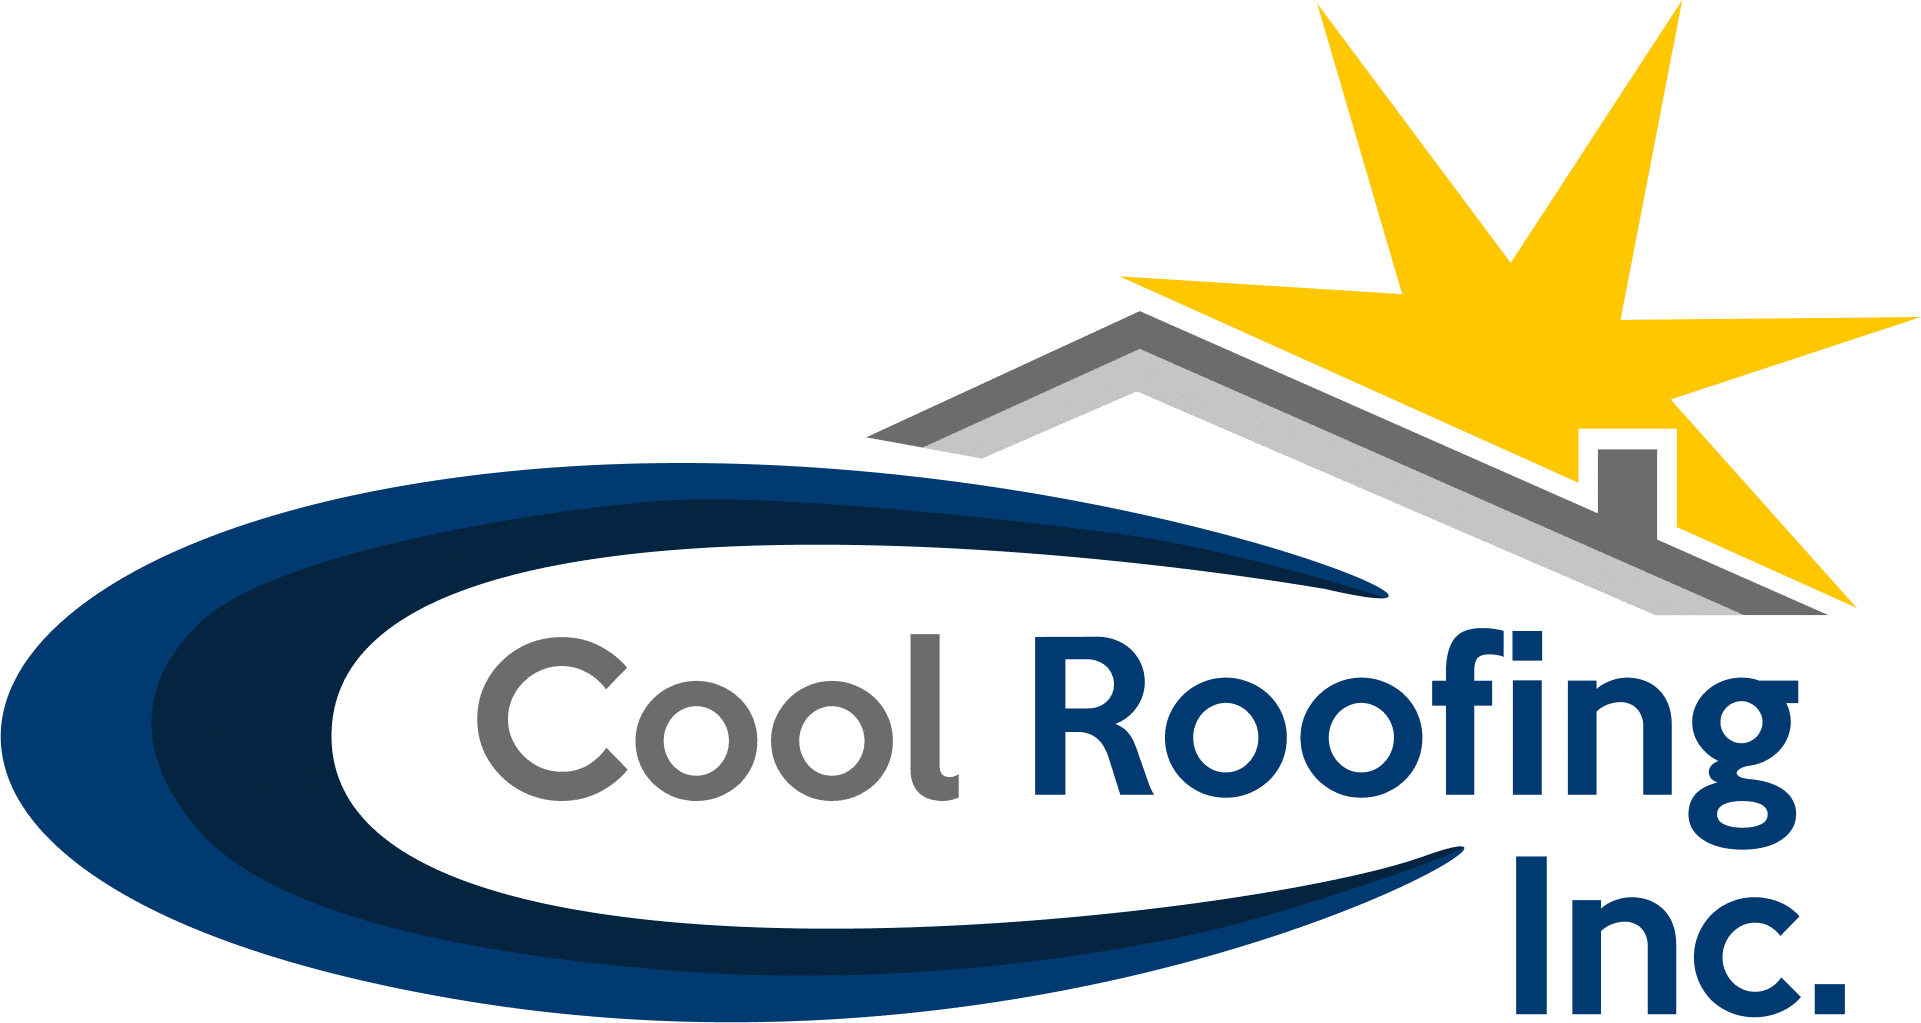 Cool Roofing, Inc. in Escondido CA - Roofing Contractor